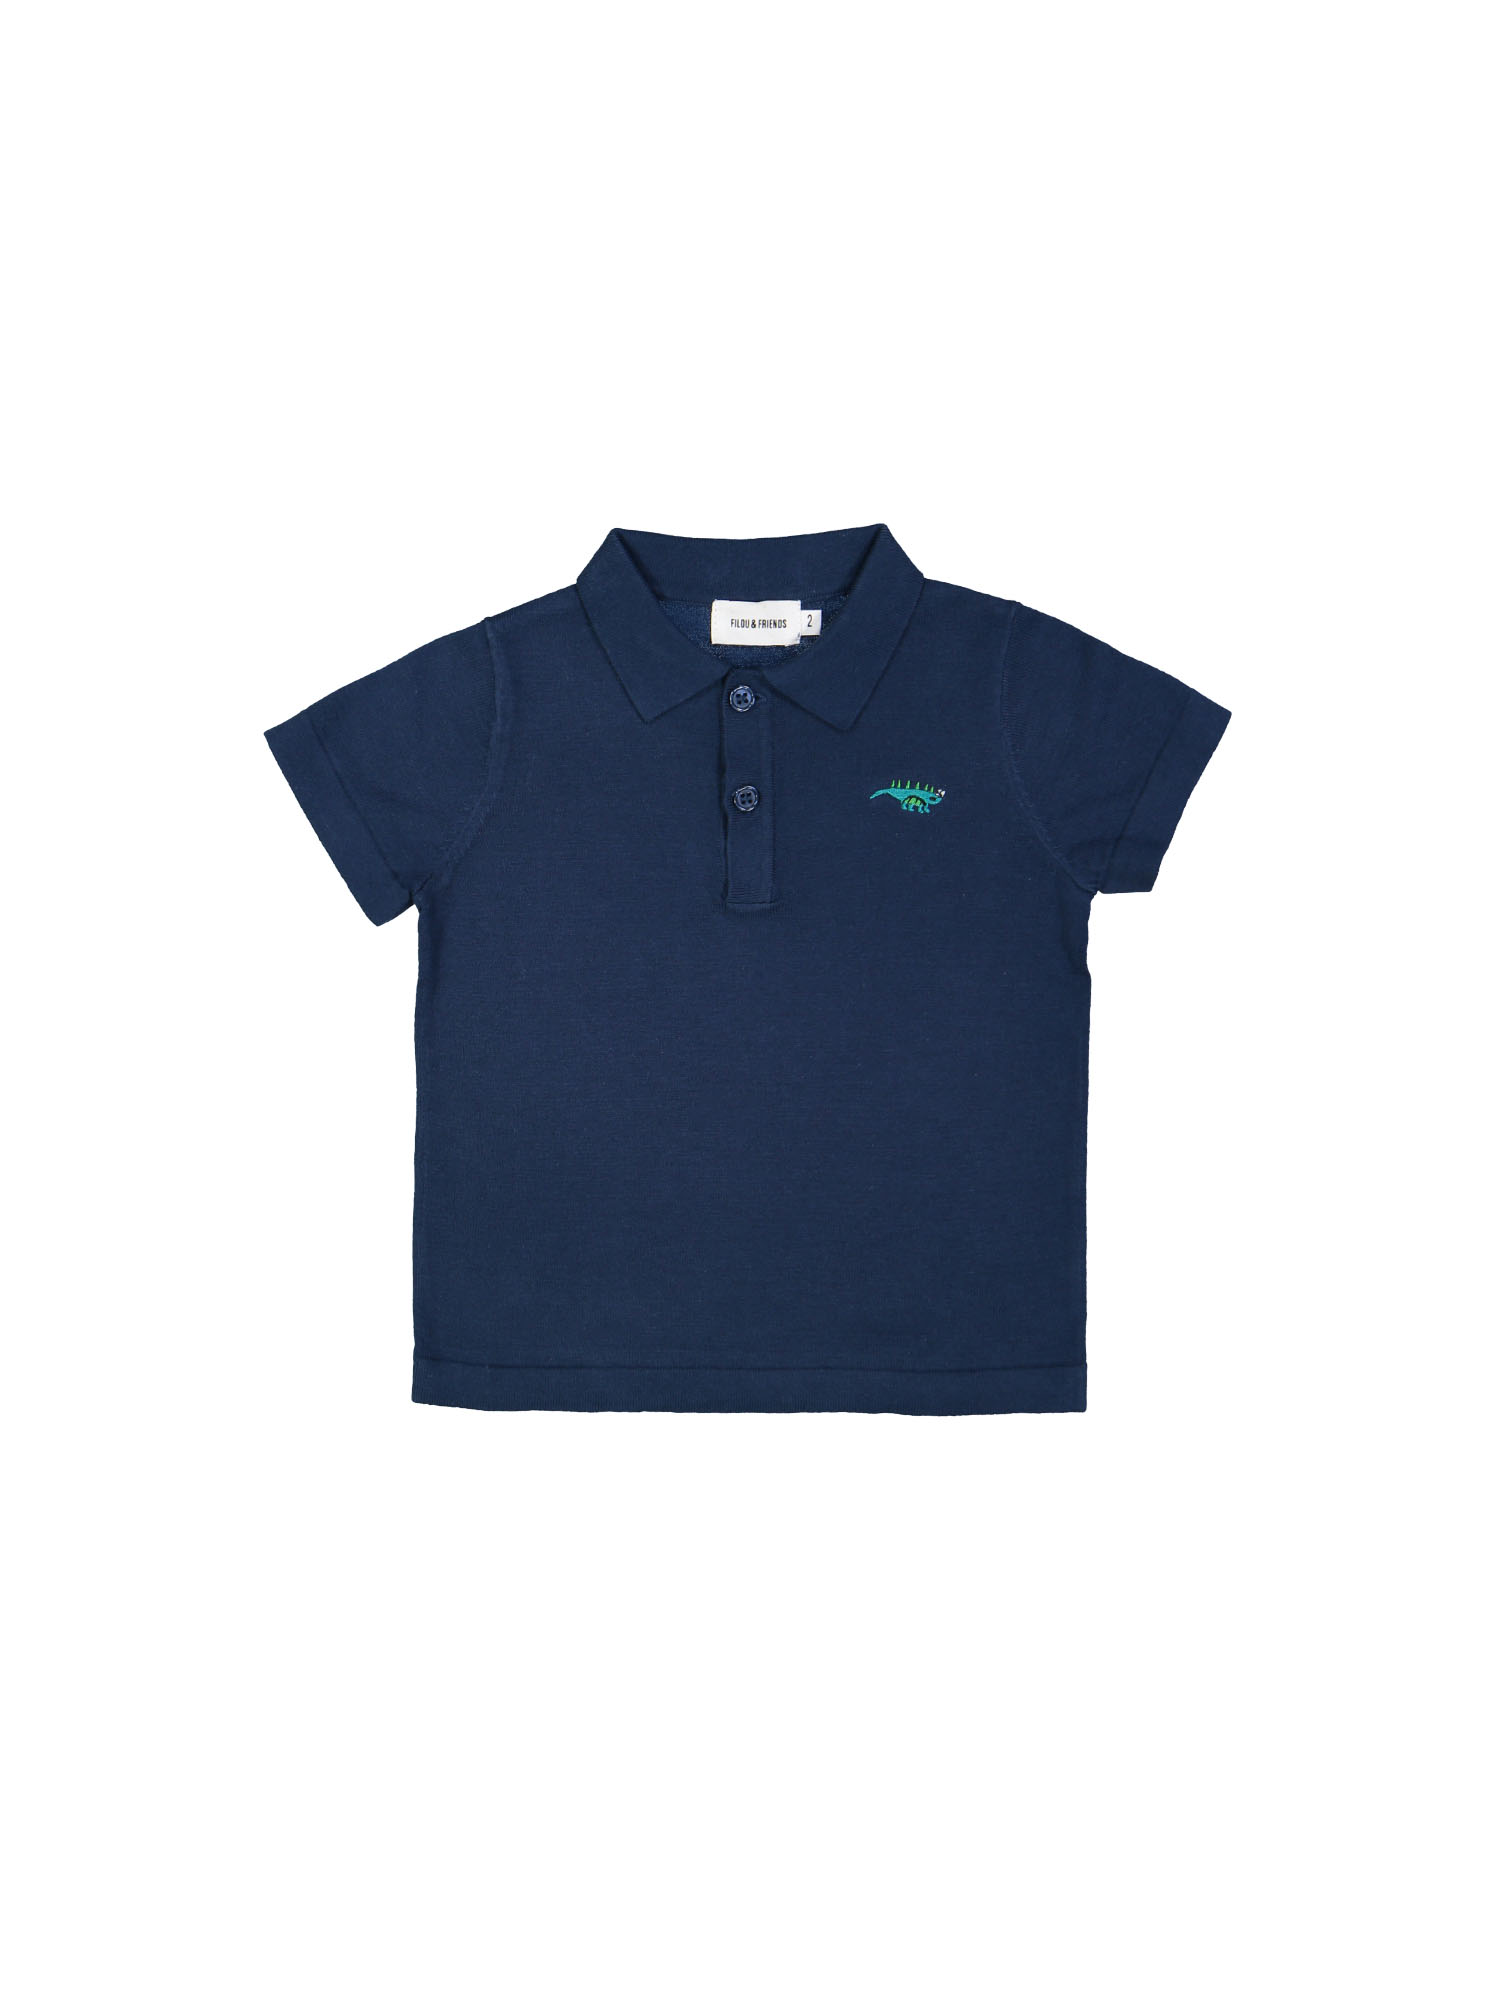 polo tricot donker blauw 07j